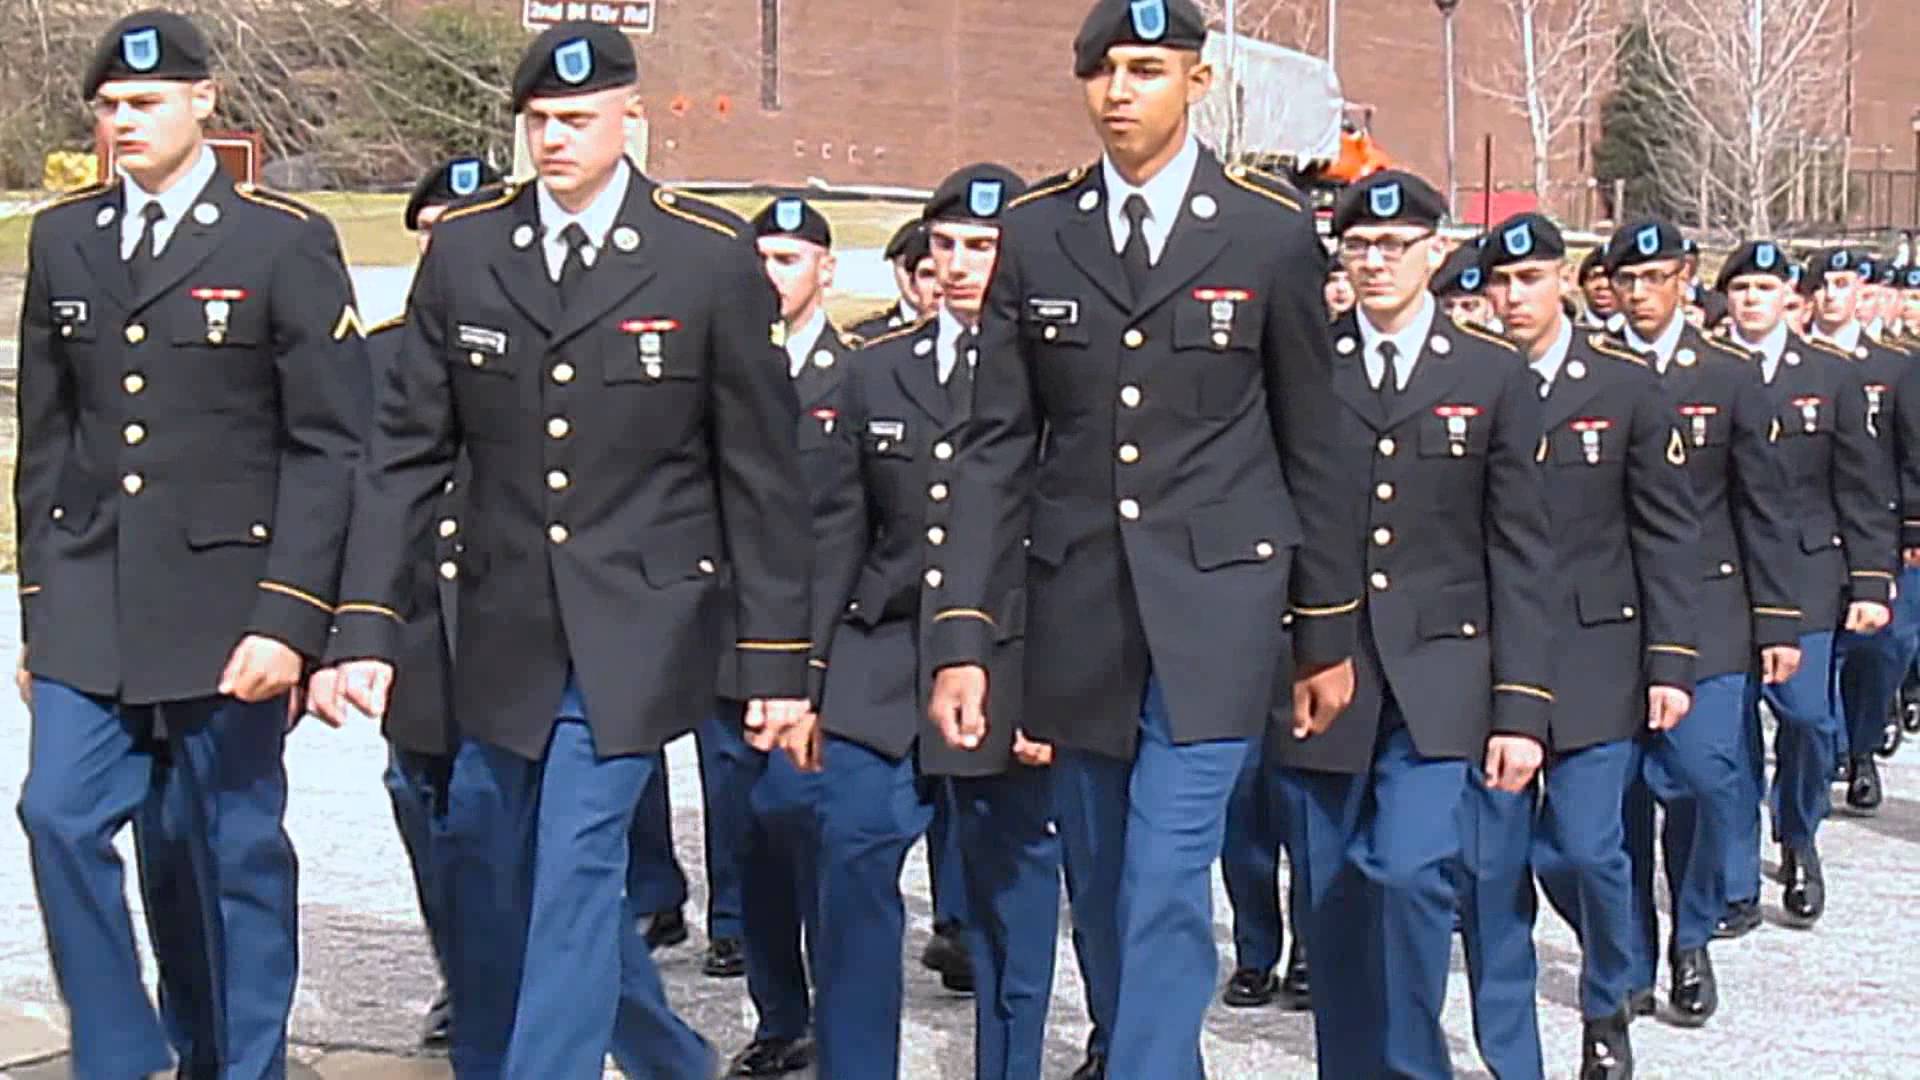 Fort Benning Delta Company 1 19 Turning Blue March